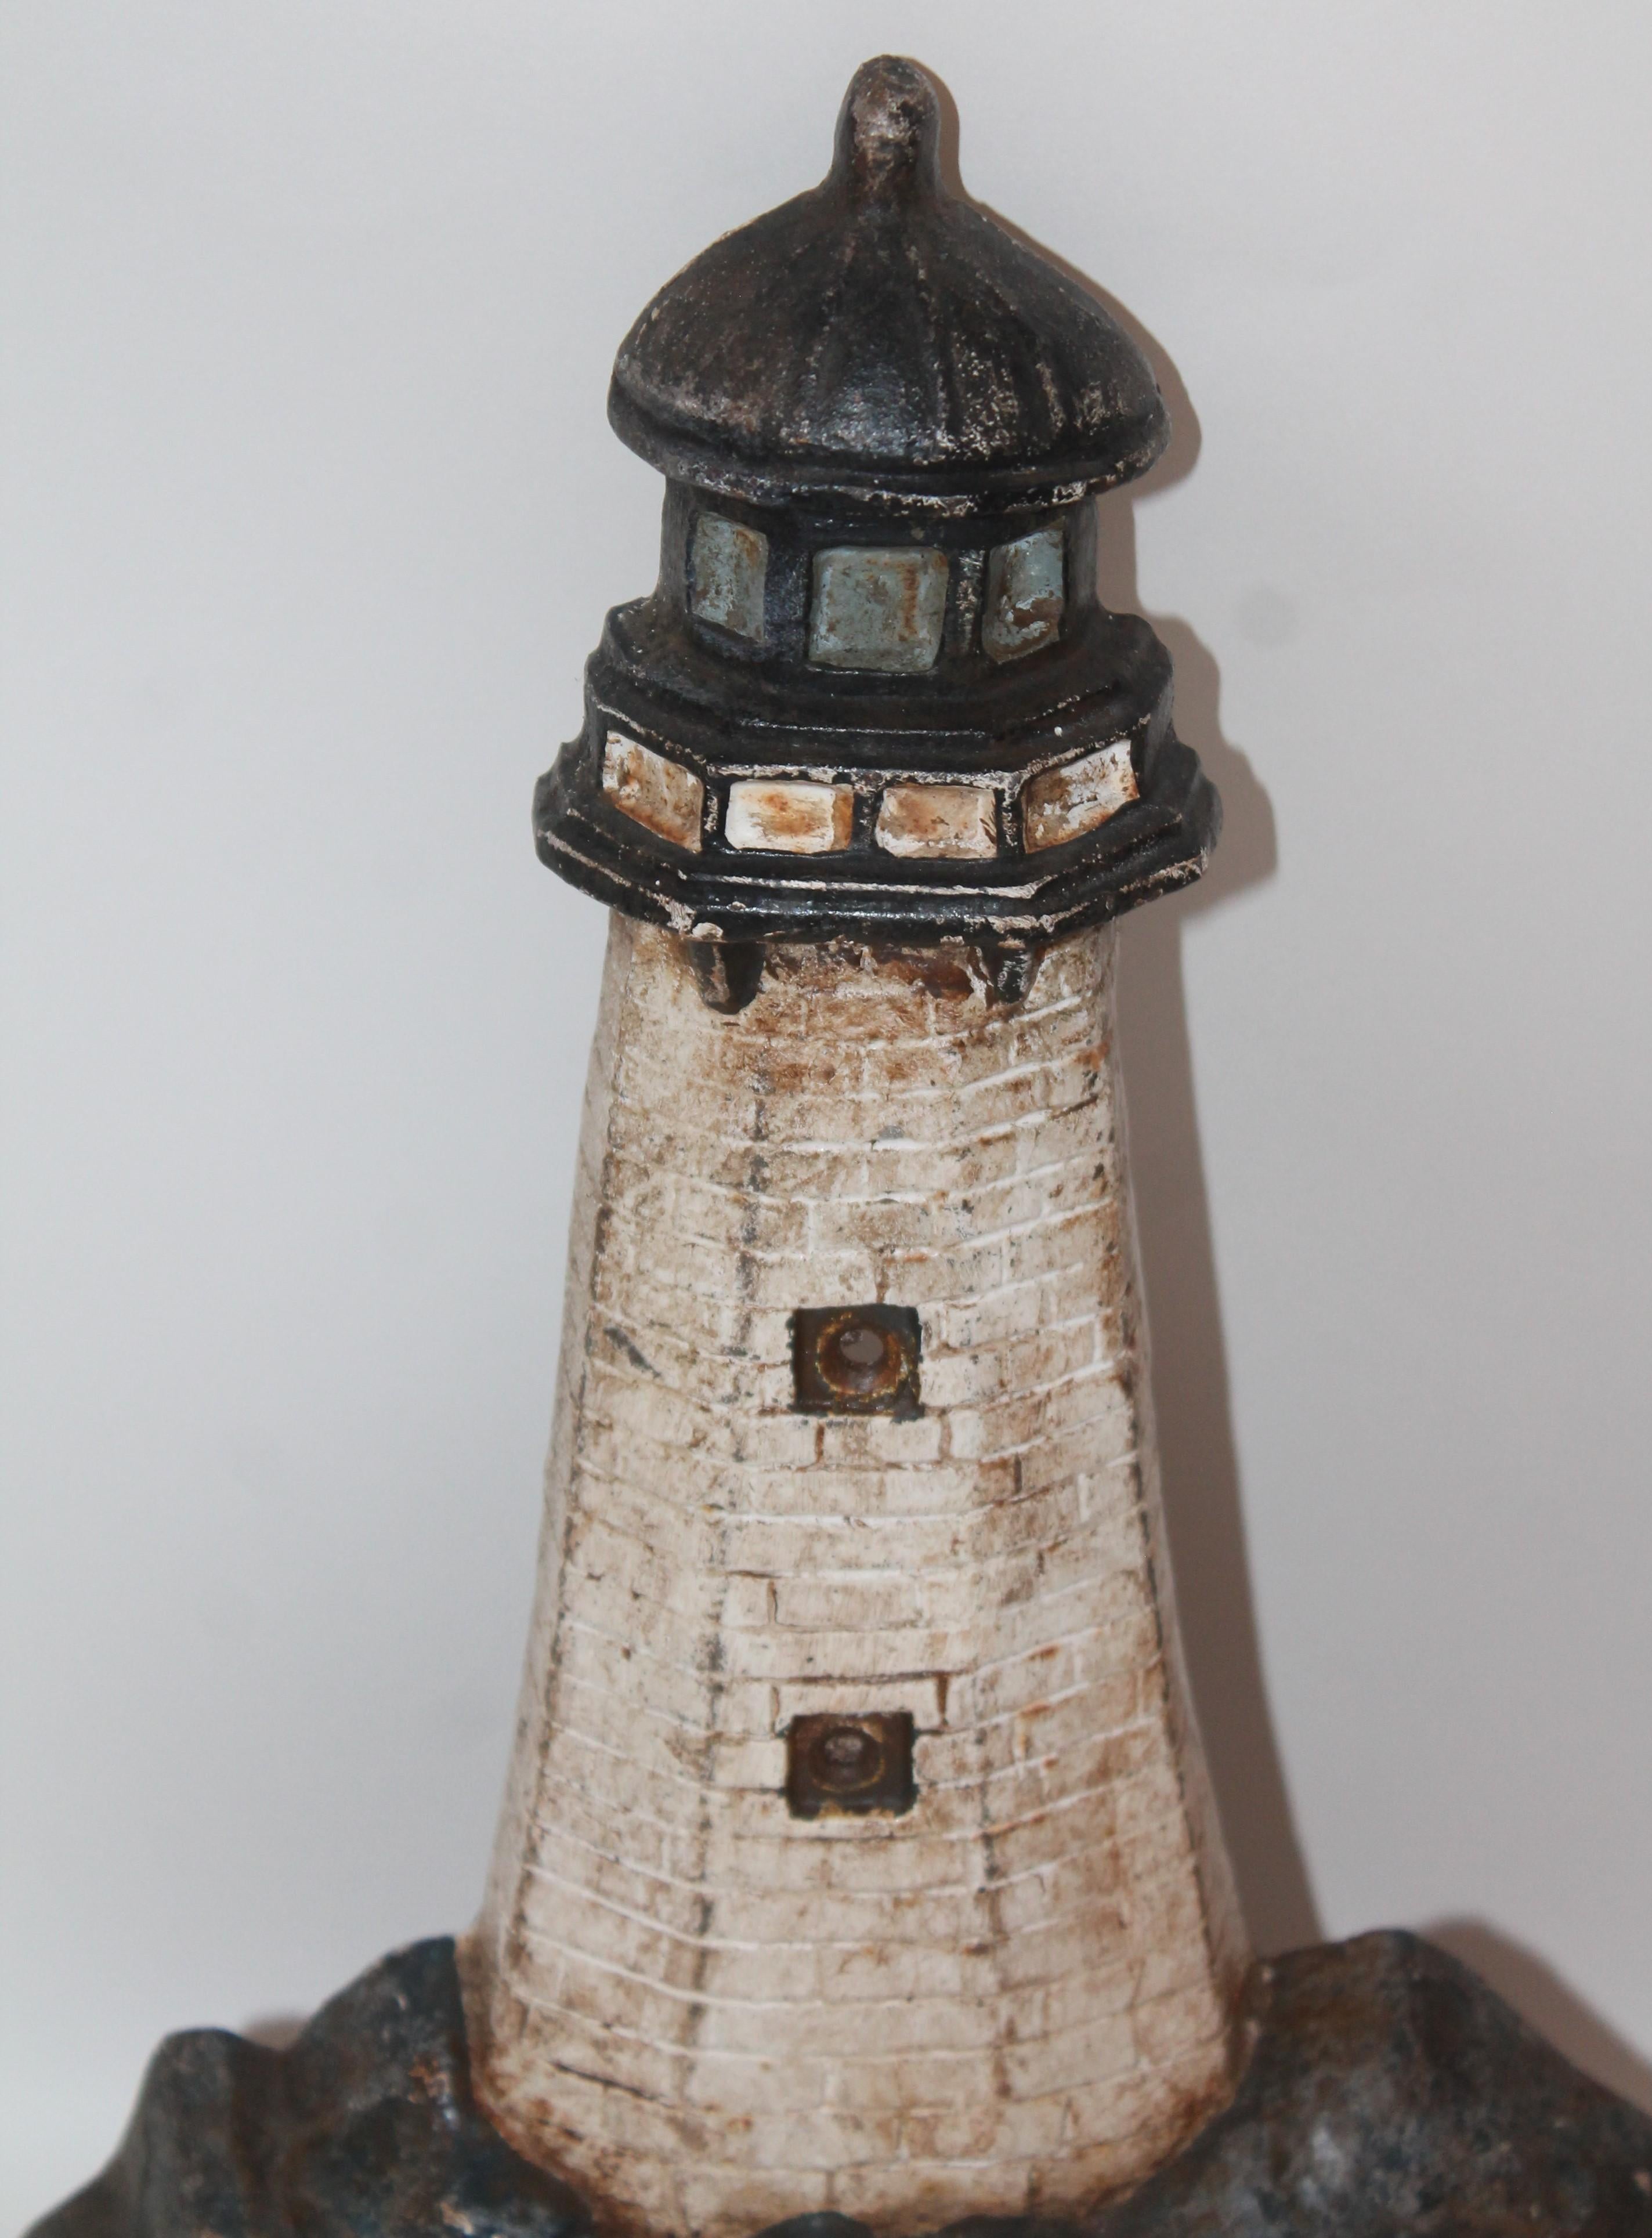 This great painted cast iron lighthouse door stop is in good condition with wear consistent from age and use. This door stop has holes in the windows for light to come or shine through.